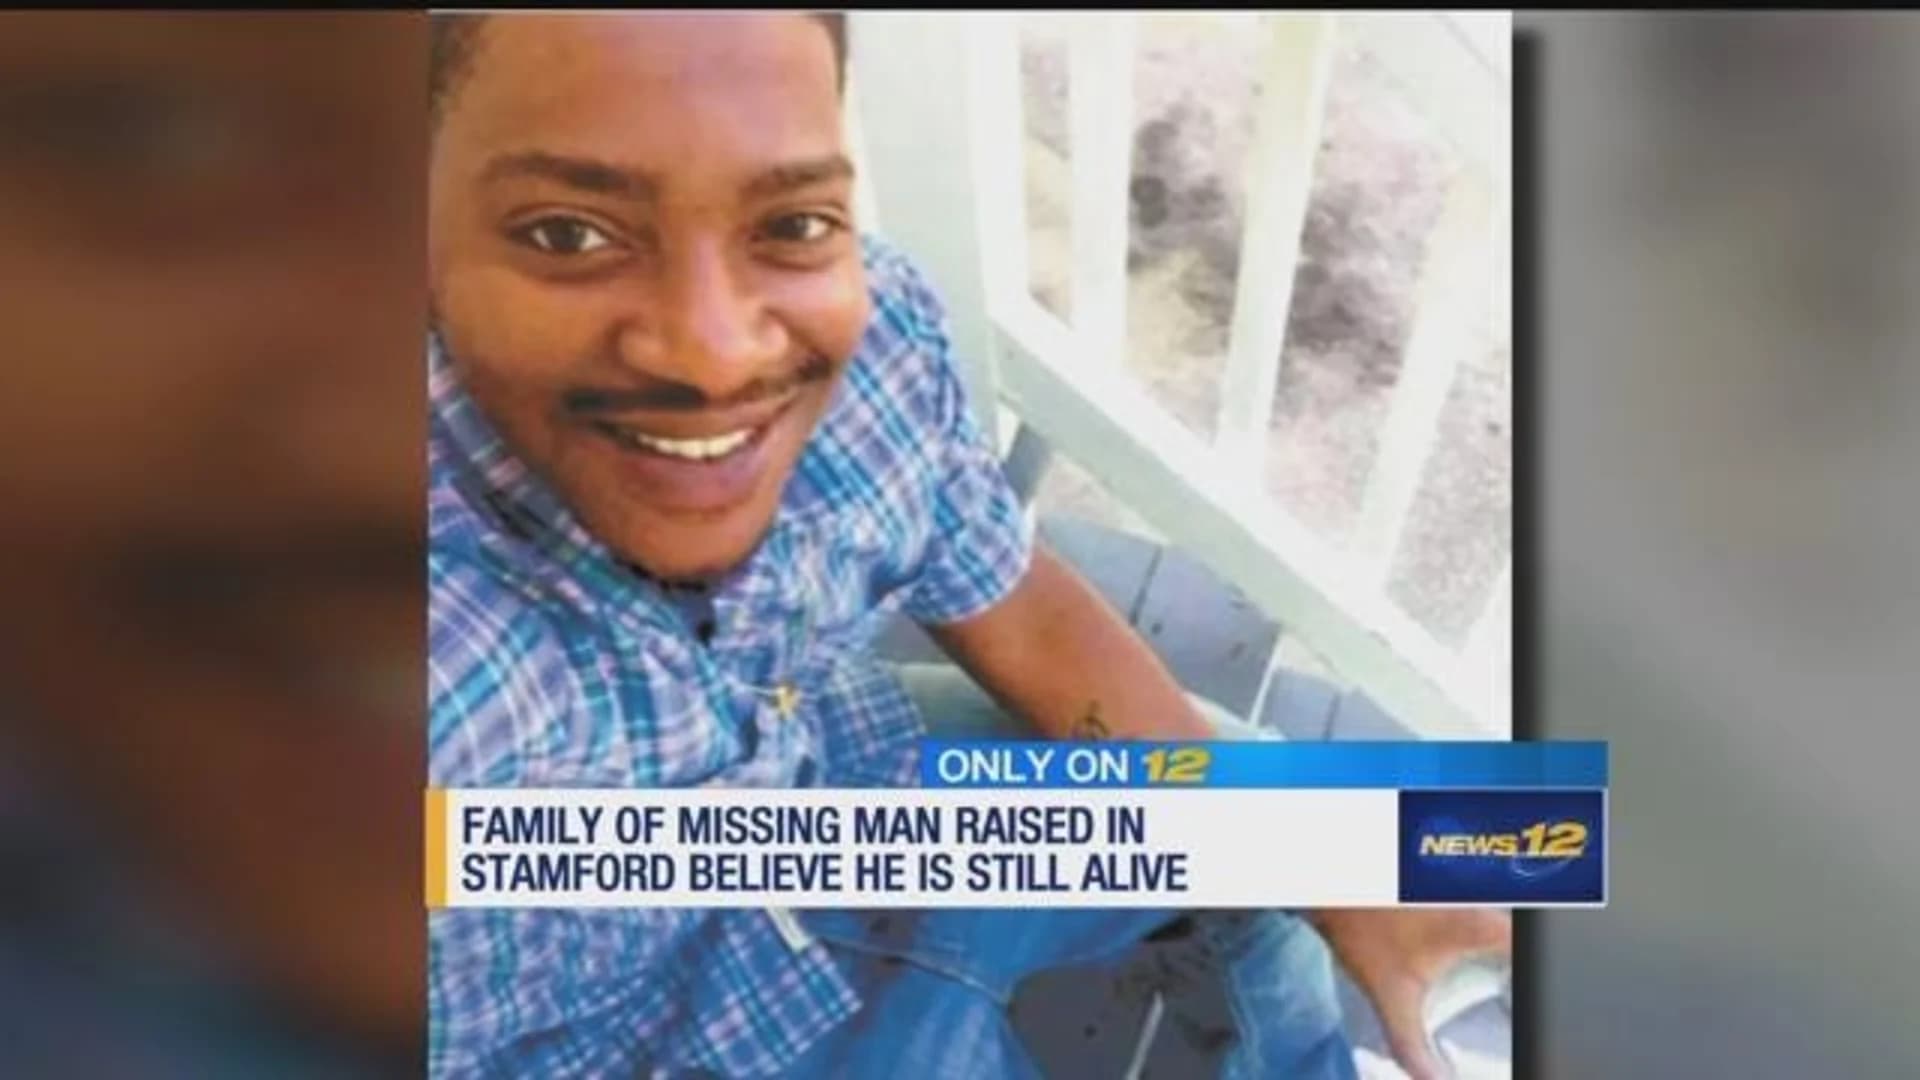 Family of missing Stamford man believes he is still alive